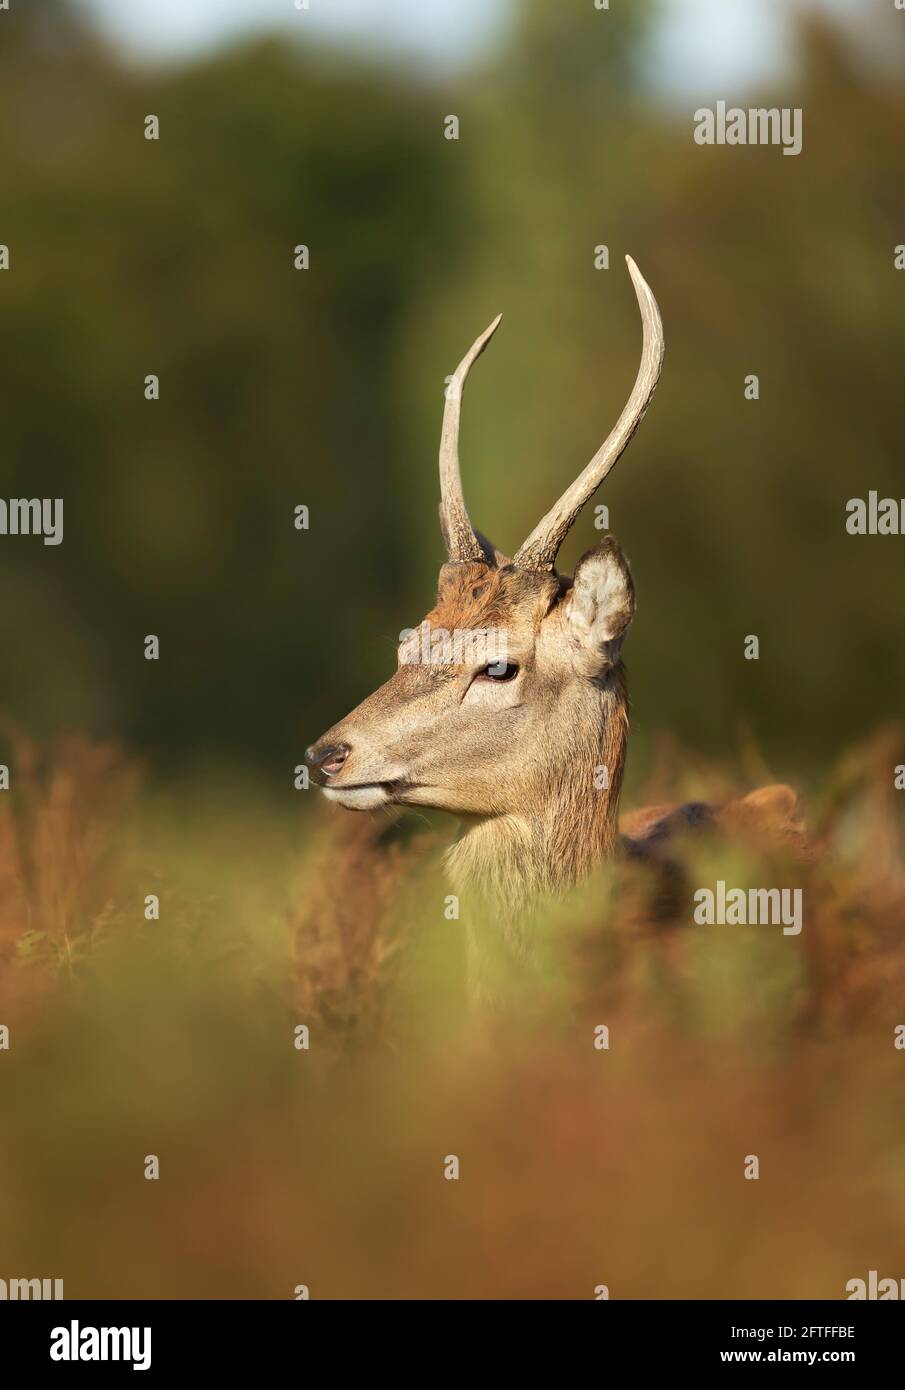 Close up of a young Red Deer stag standing in bracken in autumn, UK. Stock Photo